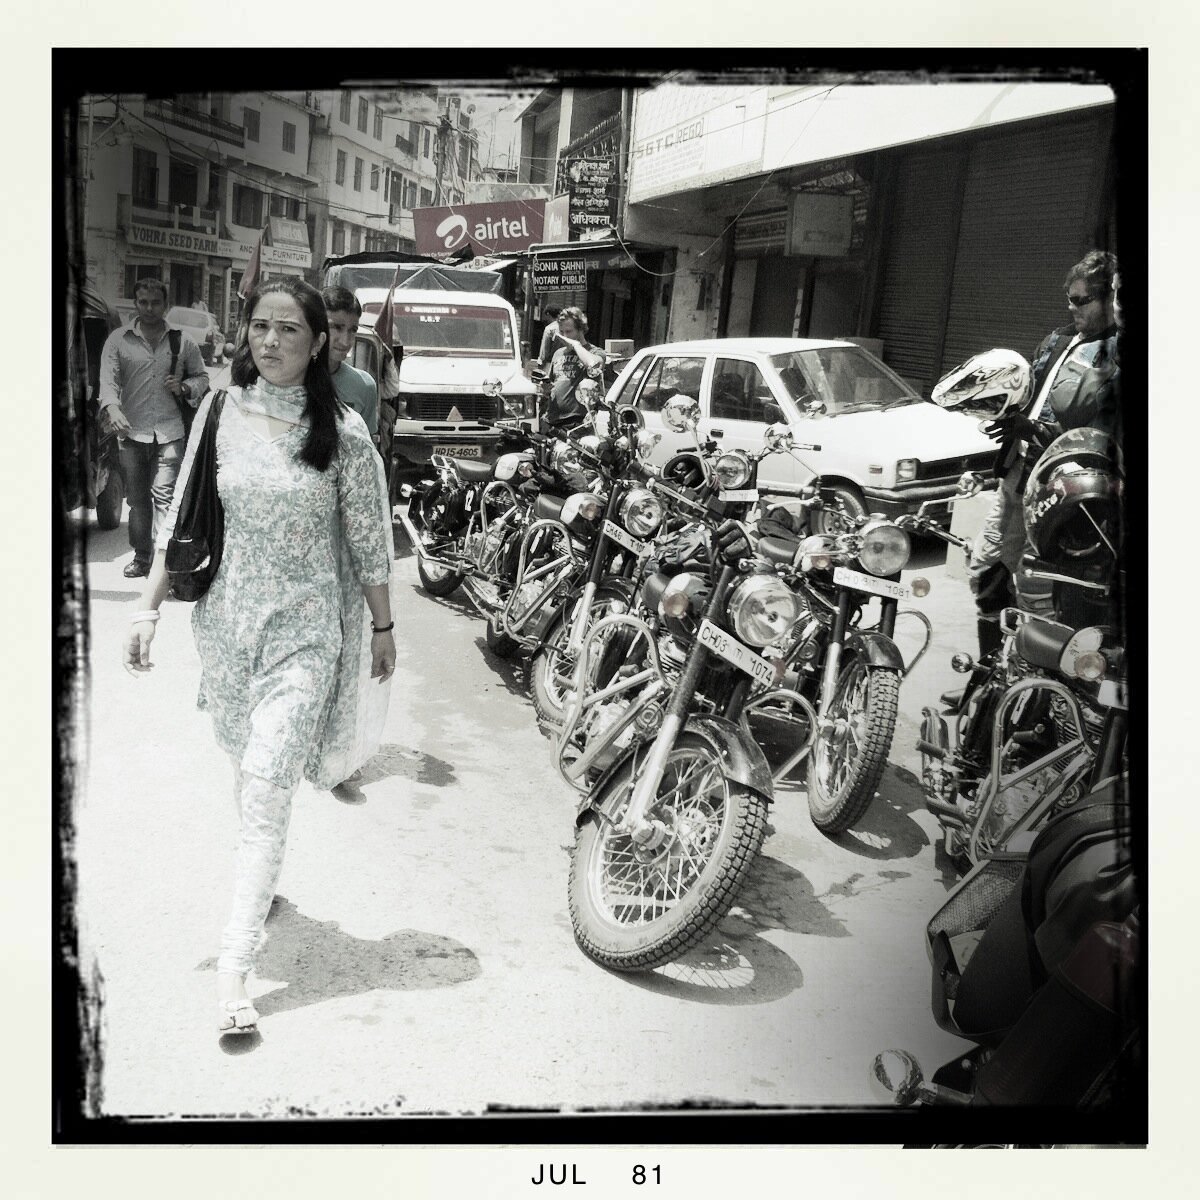 Riding Royal Enfield, shooting with iPhone3